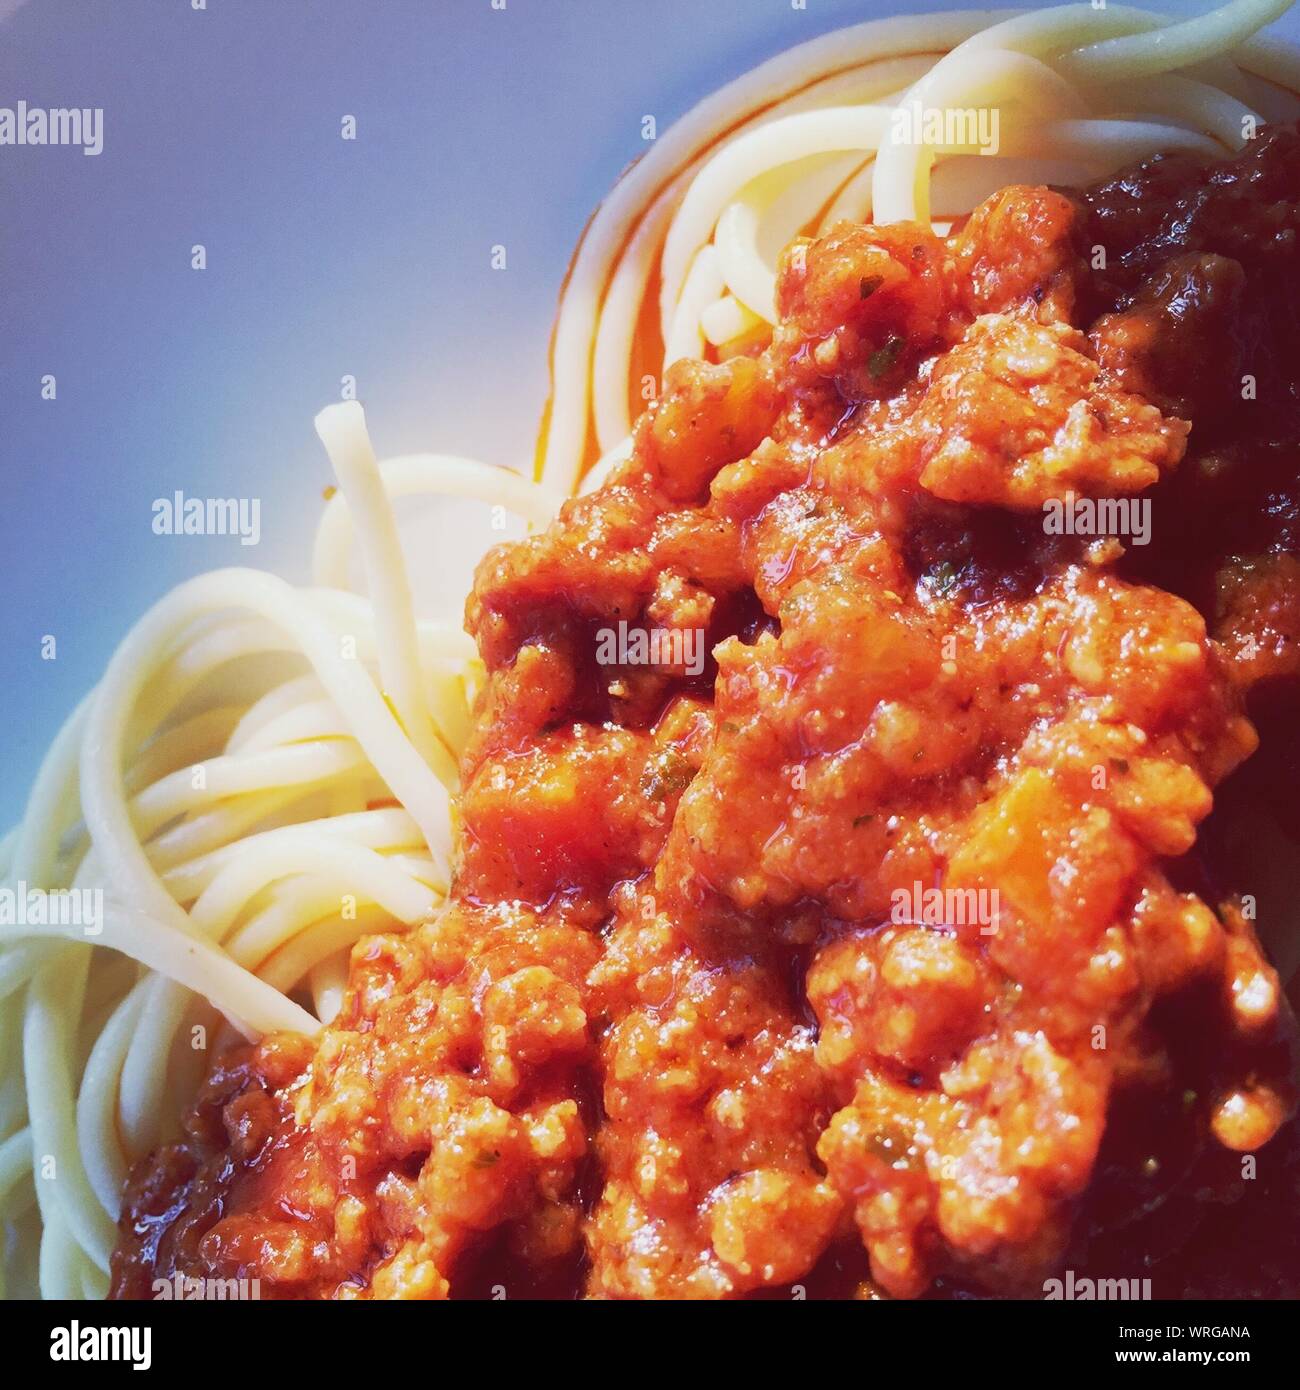 Spaghetti With Bolognese Sauce Stock Photo